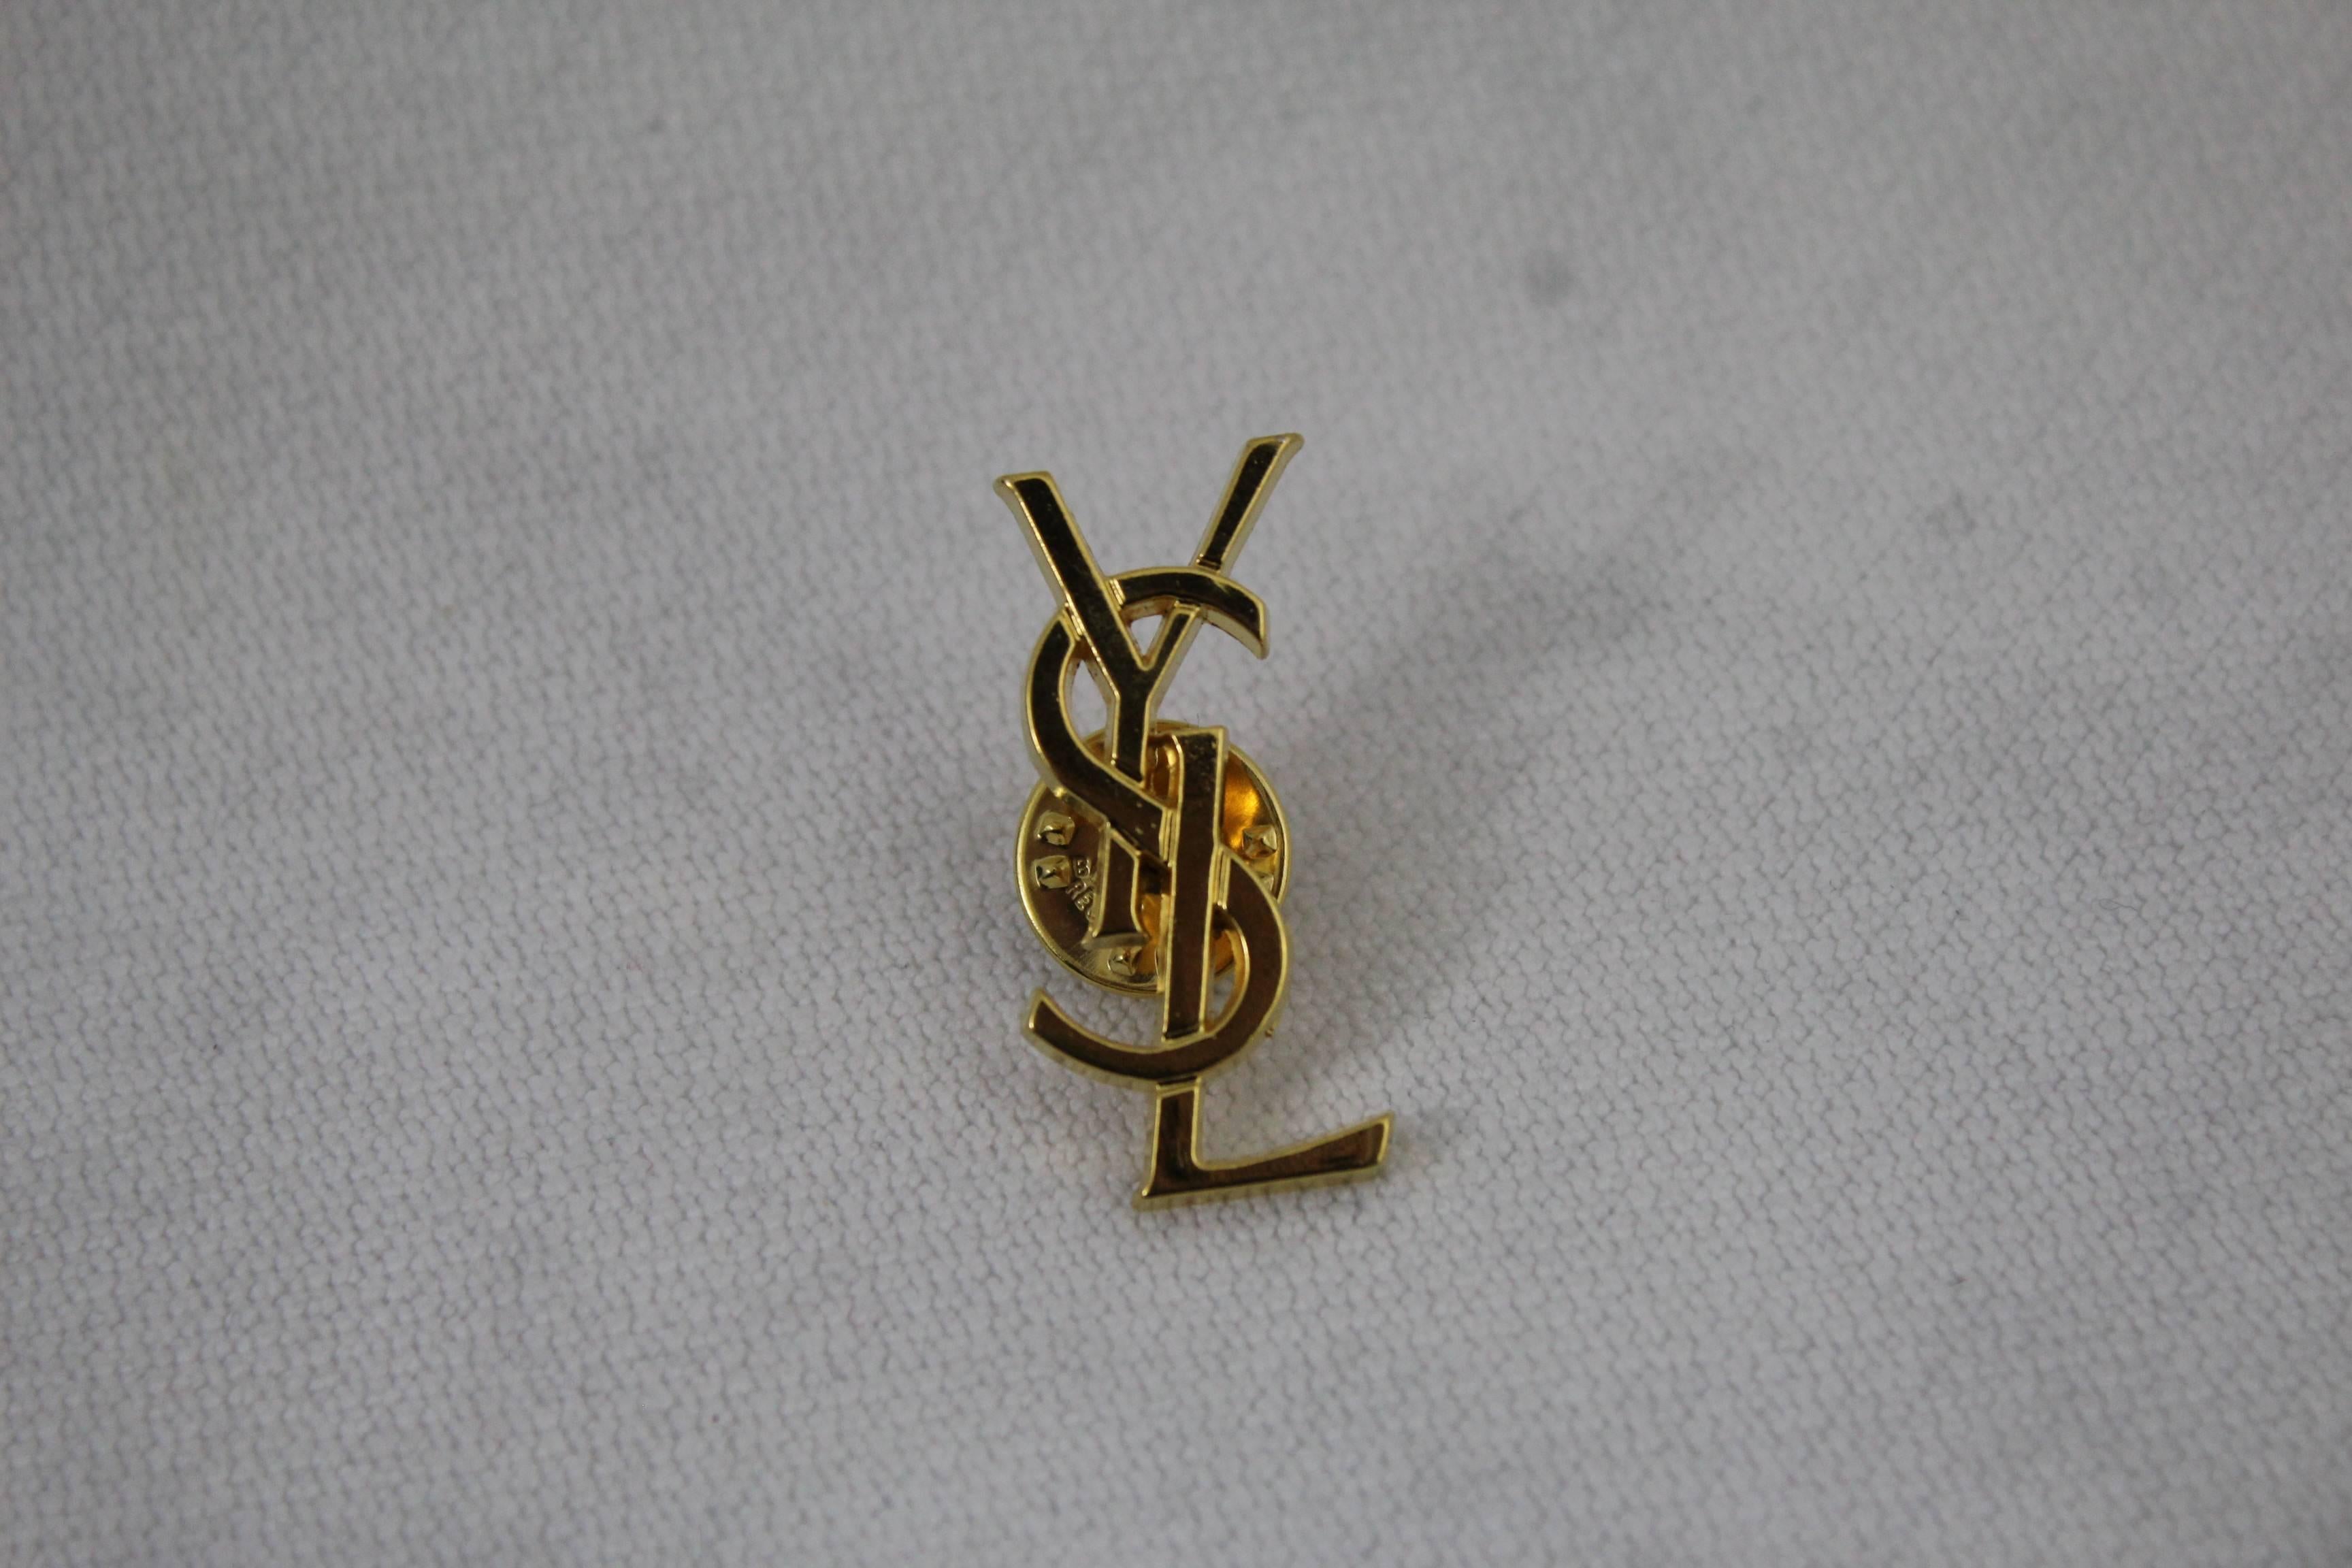 Nice vintage YSL pin in golden metal.

Comes with pouch

Size 1.5 inches